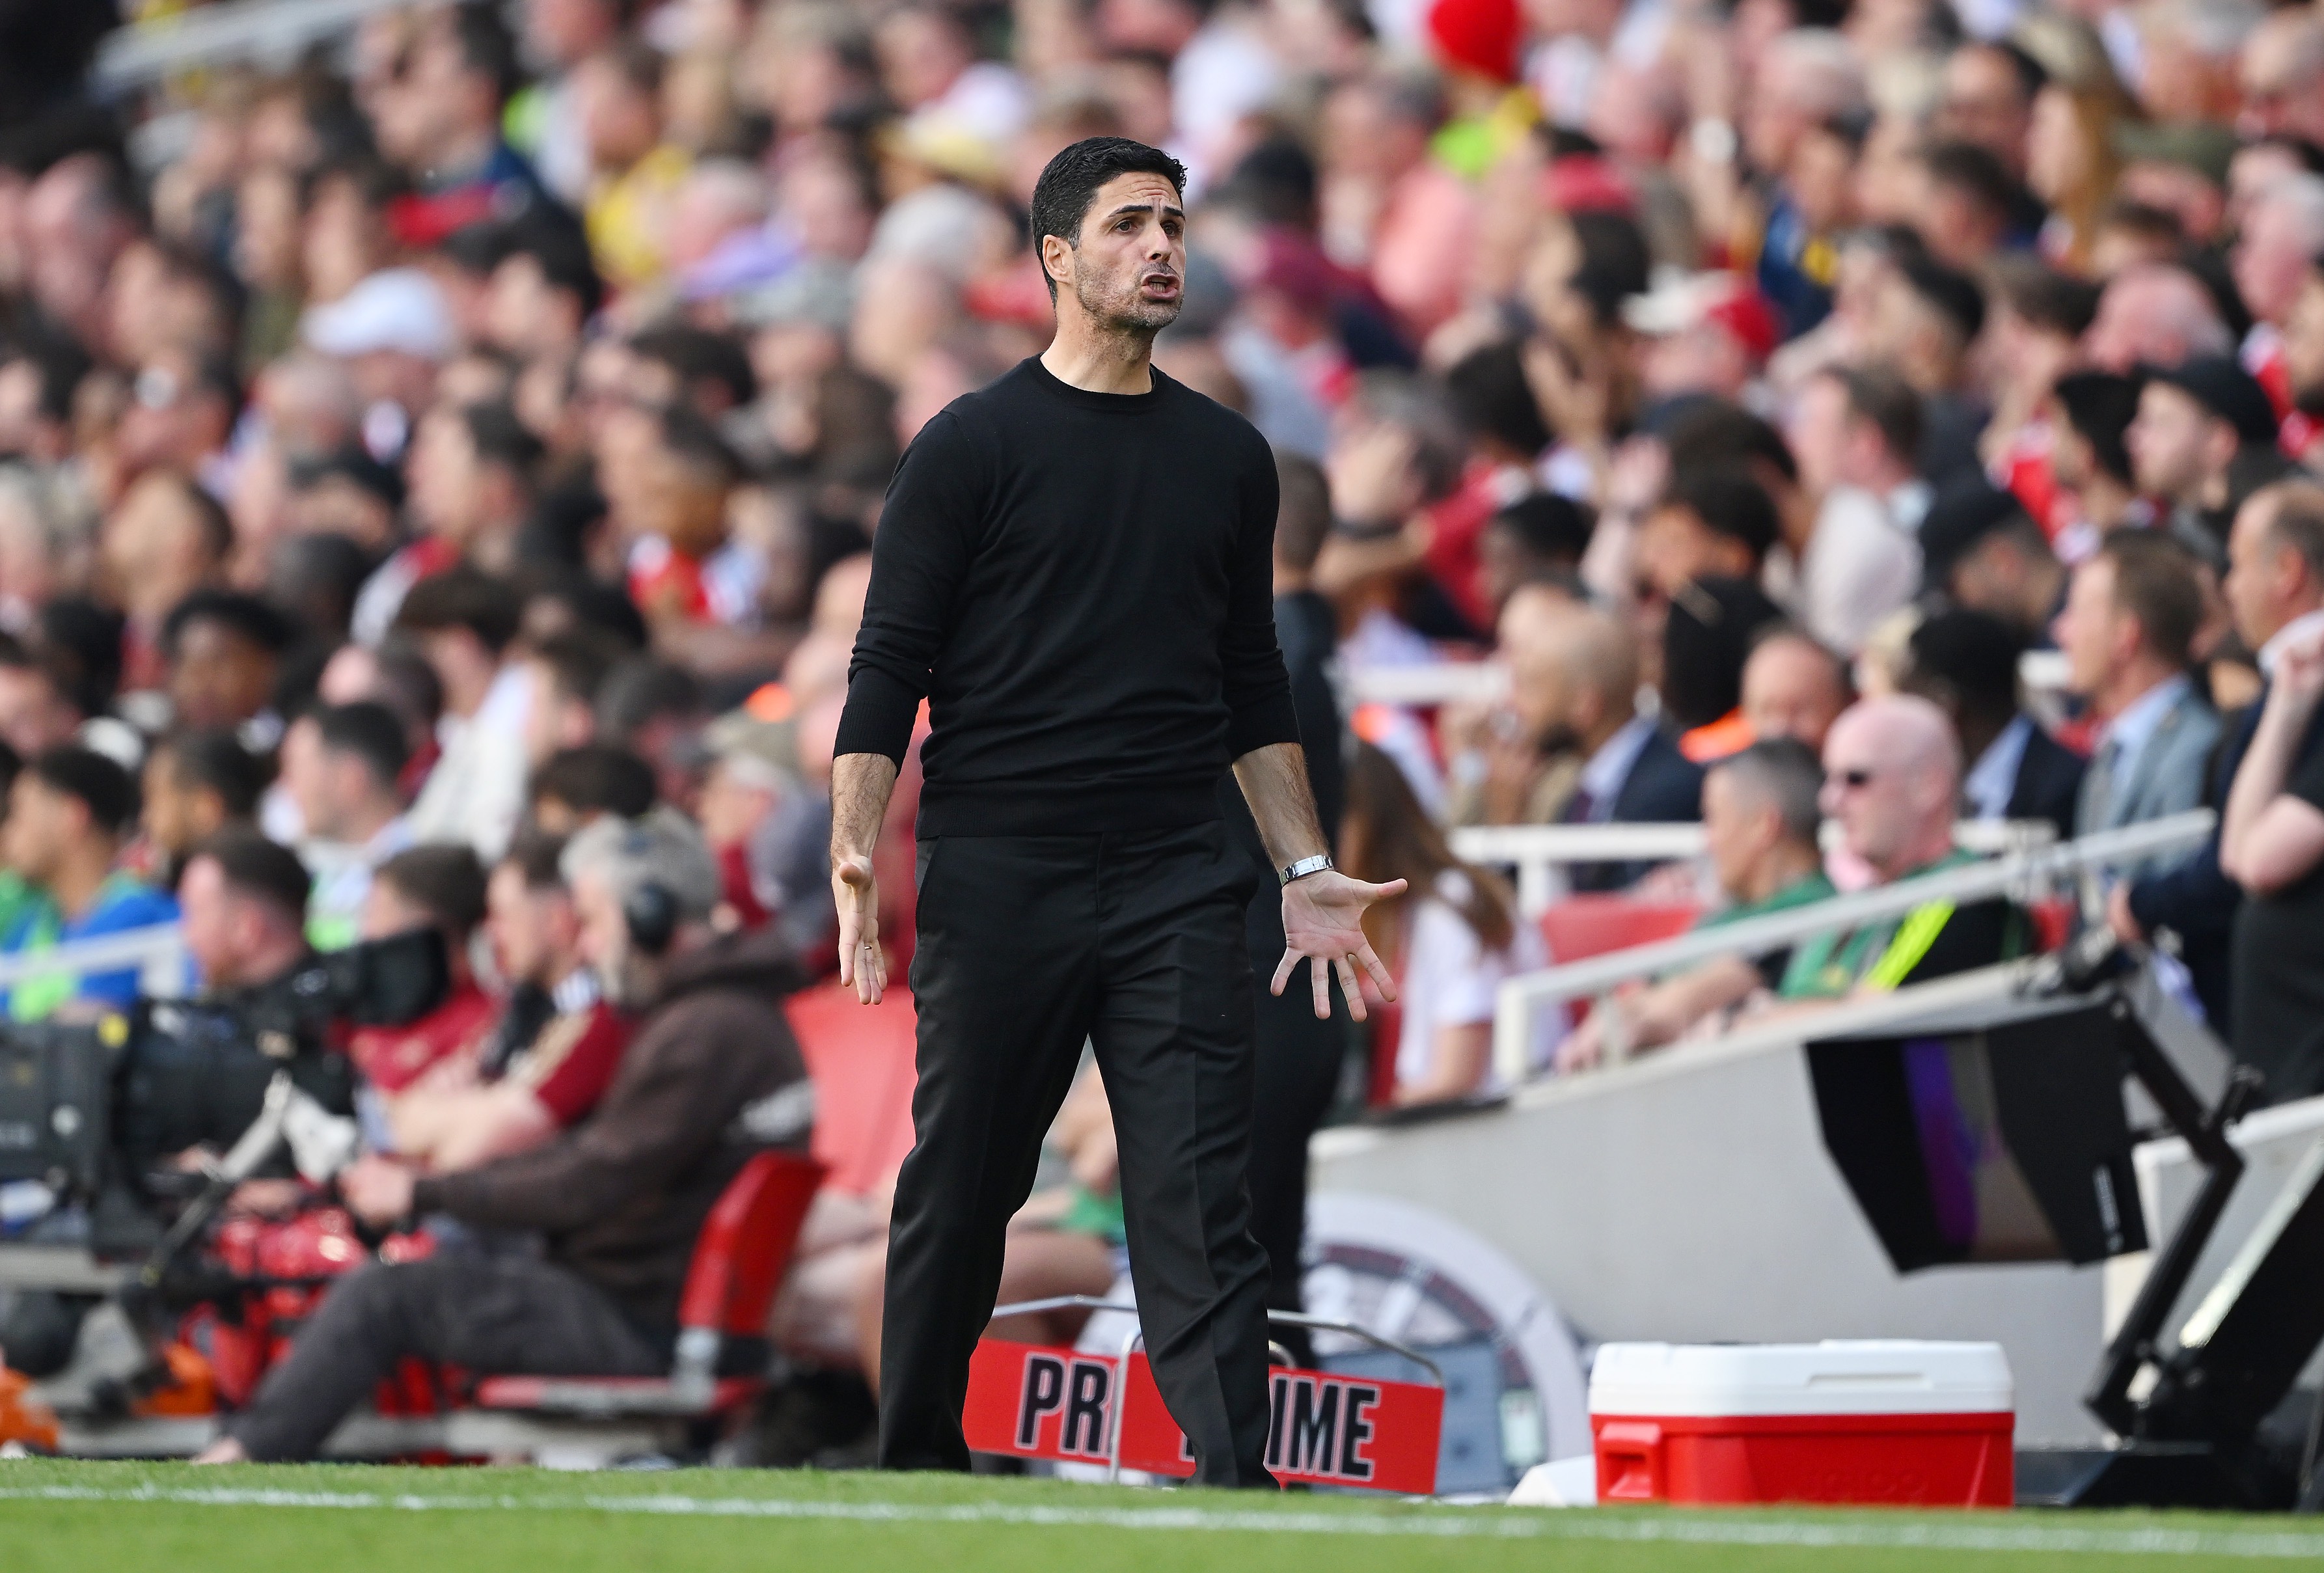 Mikel Arteta tells Arsenal fans not to be “sad” after losing title race to Man City